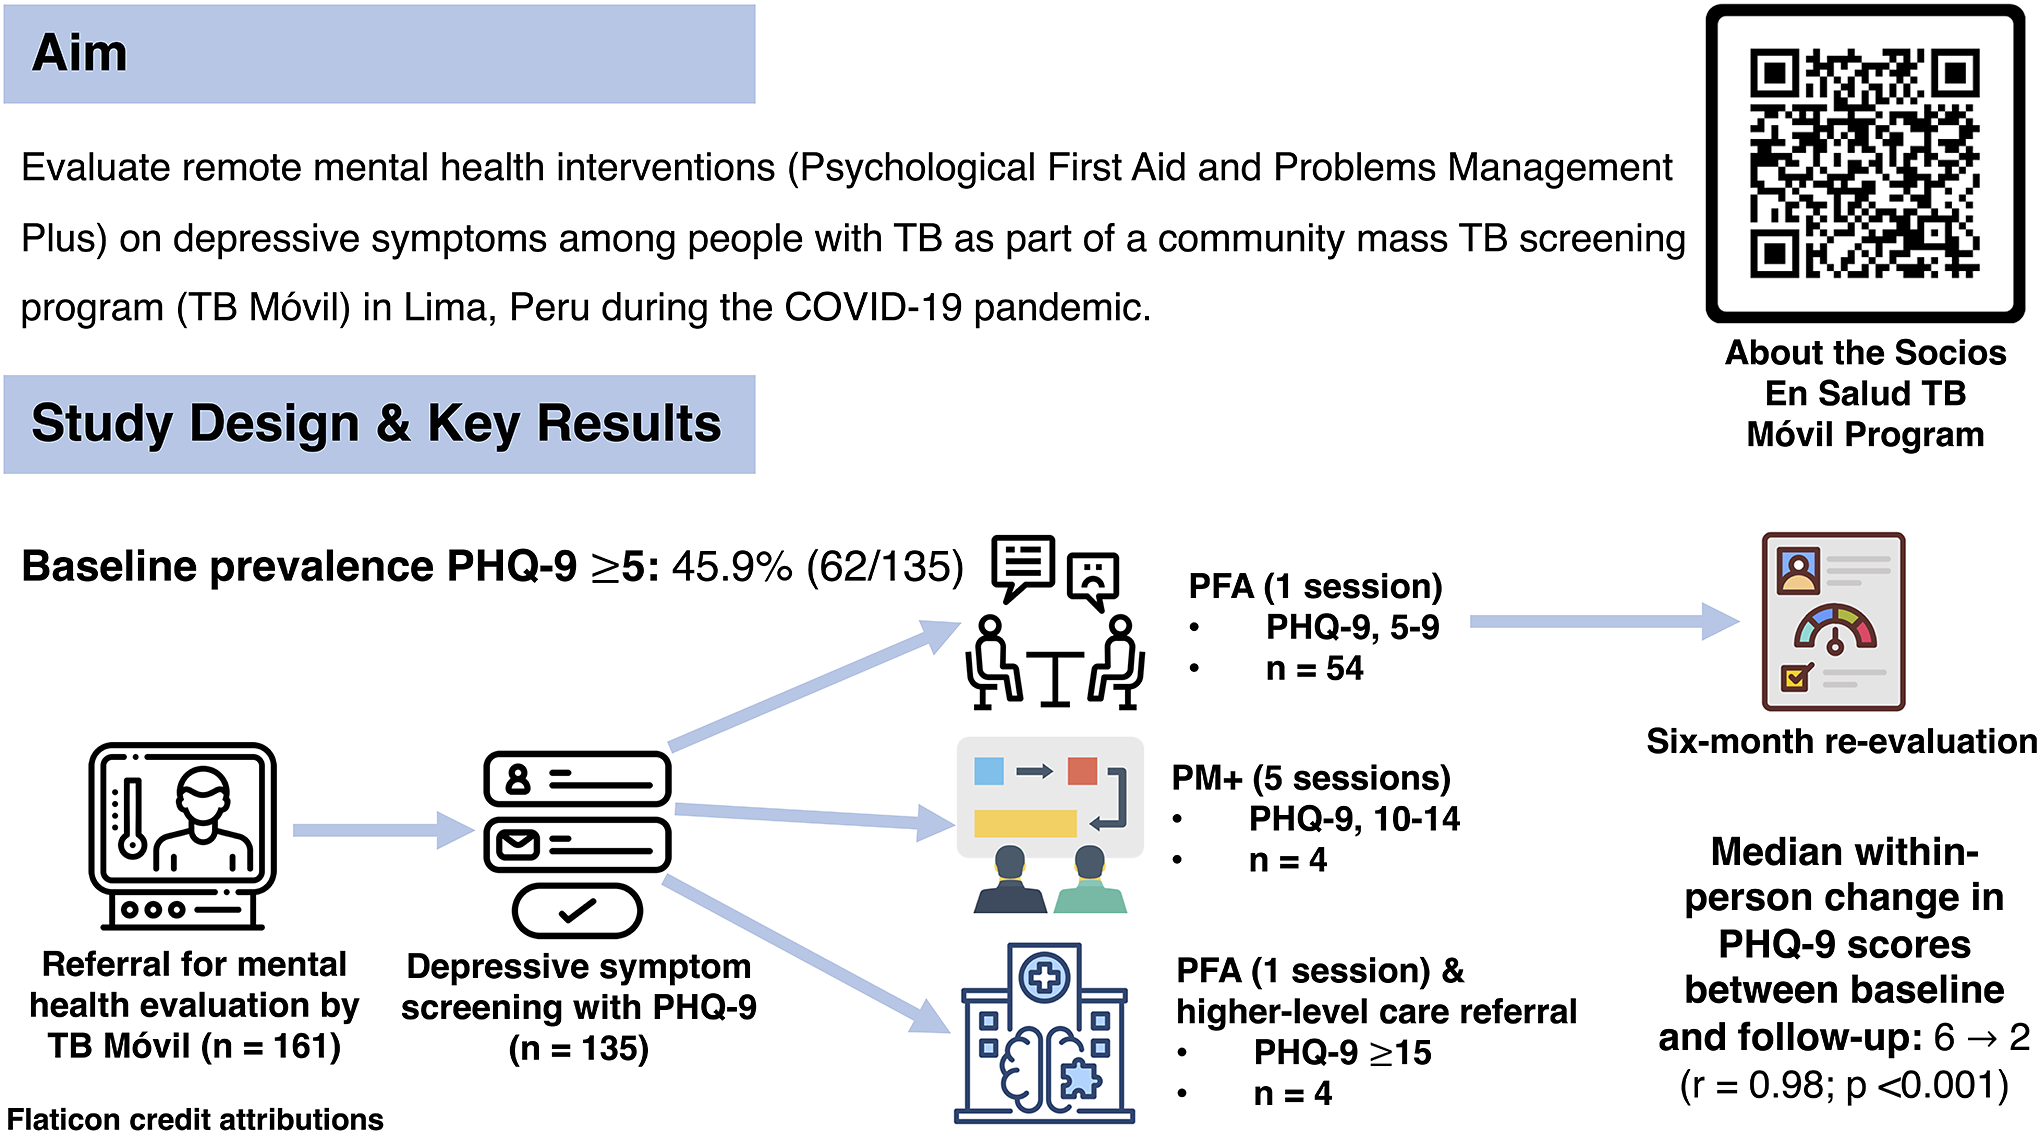 graphical abstract for Programmatic implementation of depression screening and remote mental health support sessions for persons recently diagnosed with TB in Lima, Peru during the COVID-19 pandemic - open in full screen